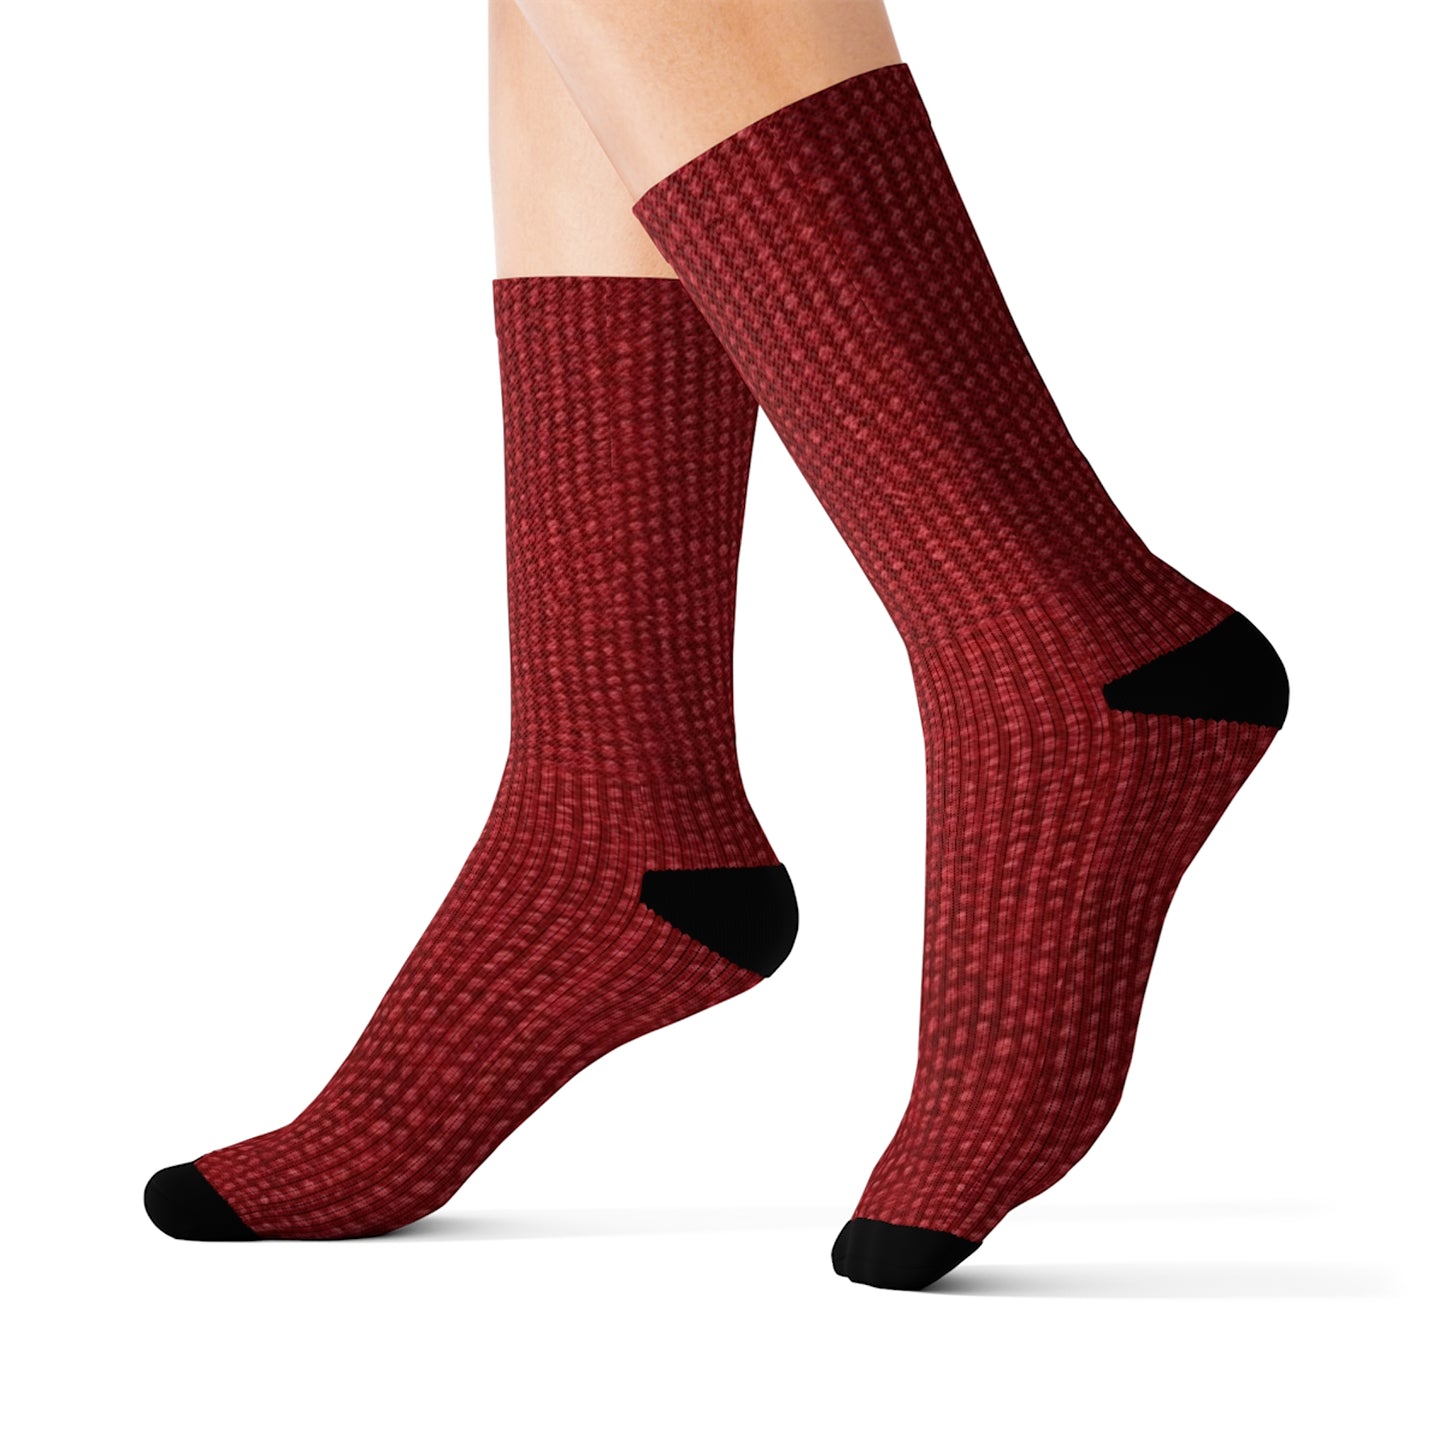 Bold Ruby Red: Denim-Inspired, Passionate Fabric Style - Sublimation Socks